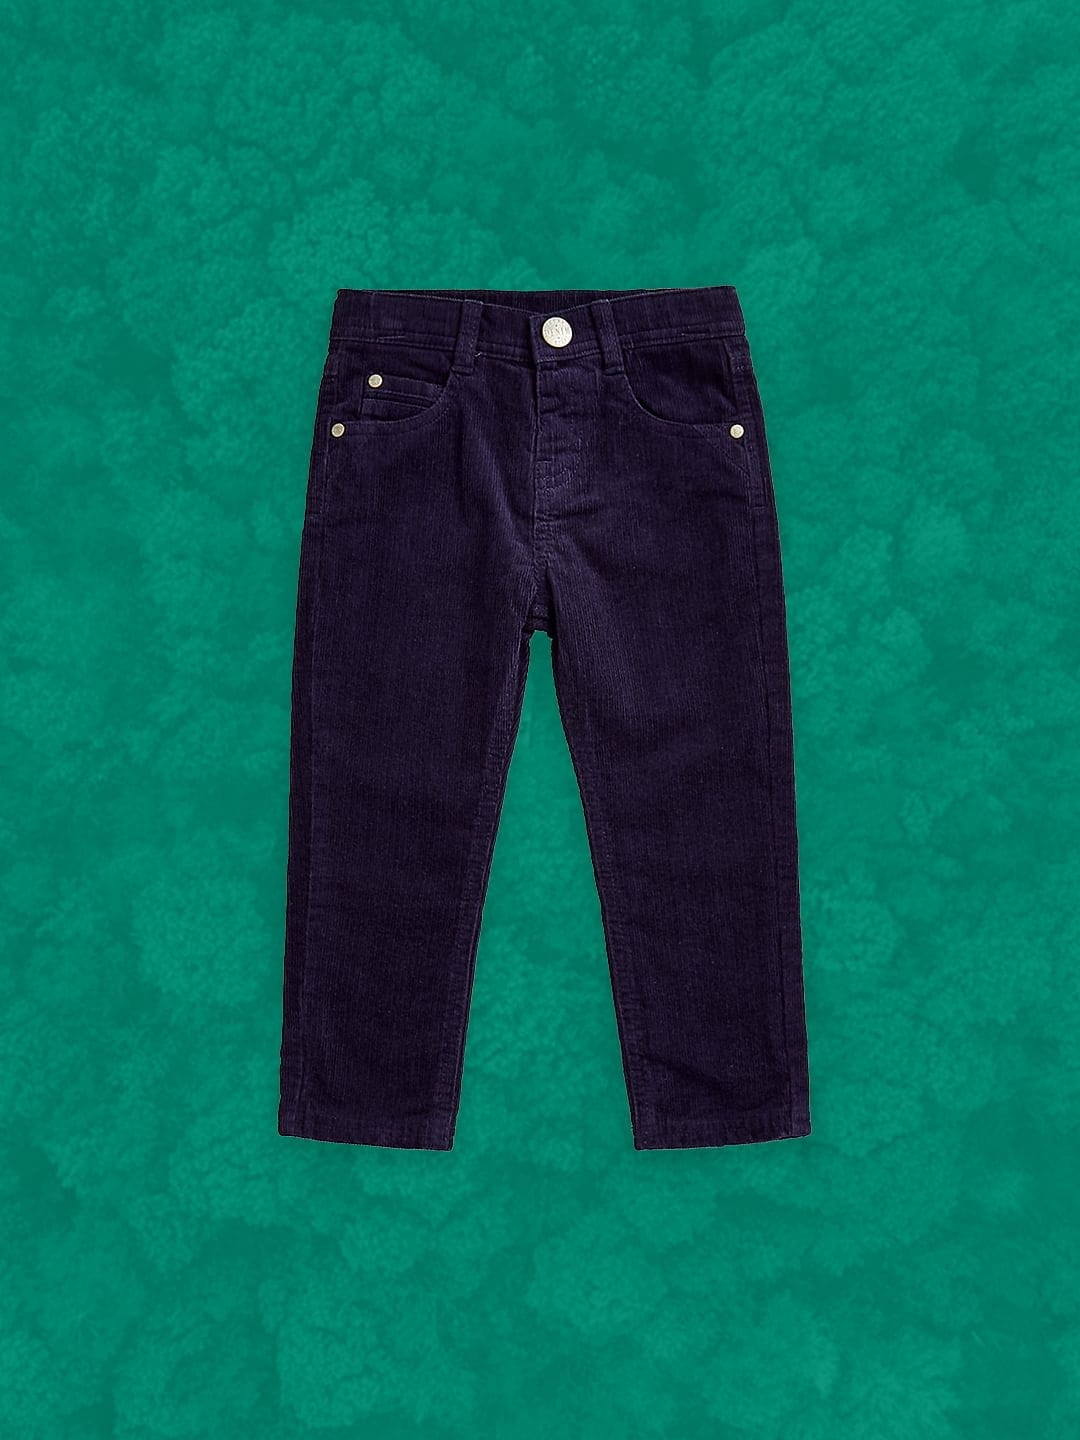 Mothercare | Boys Corduroy Trousers -Navy 0